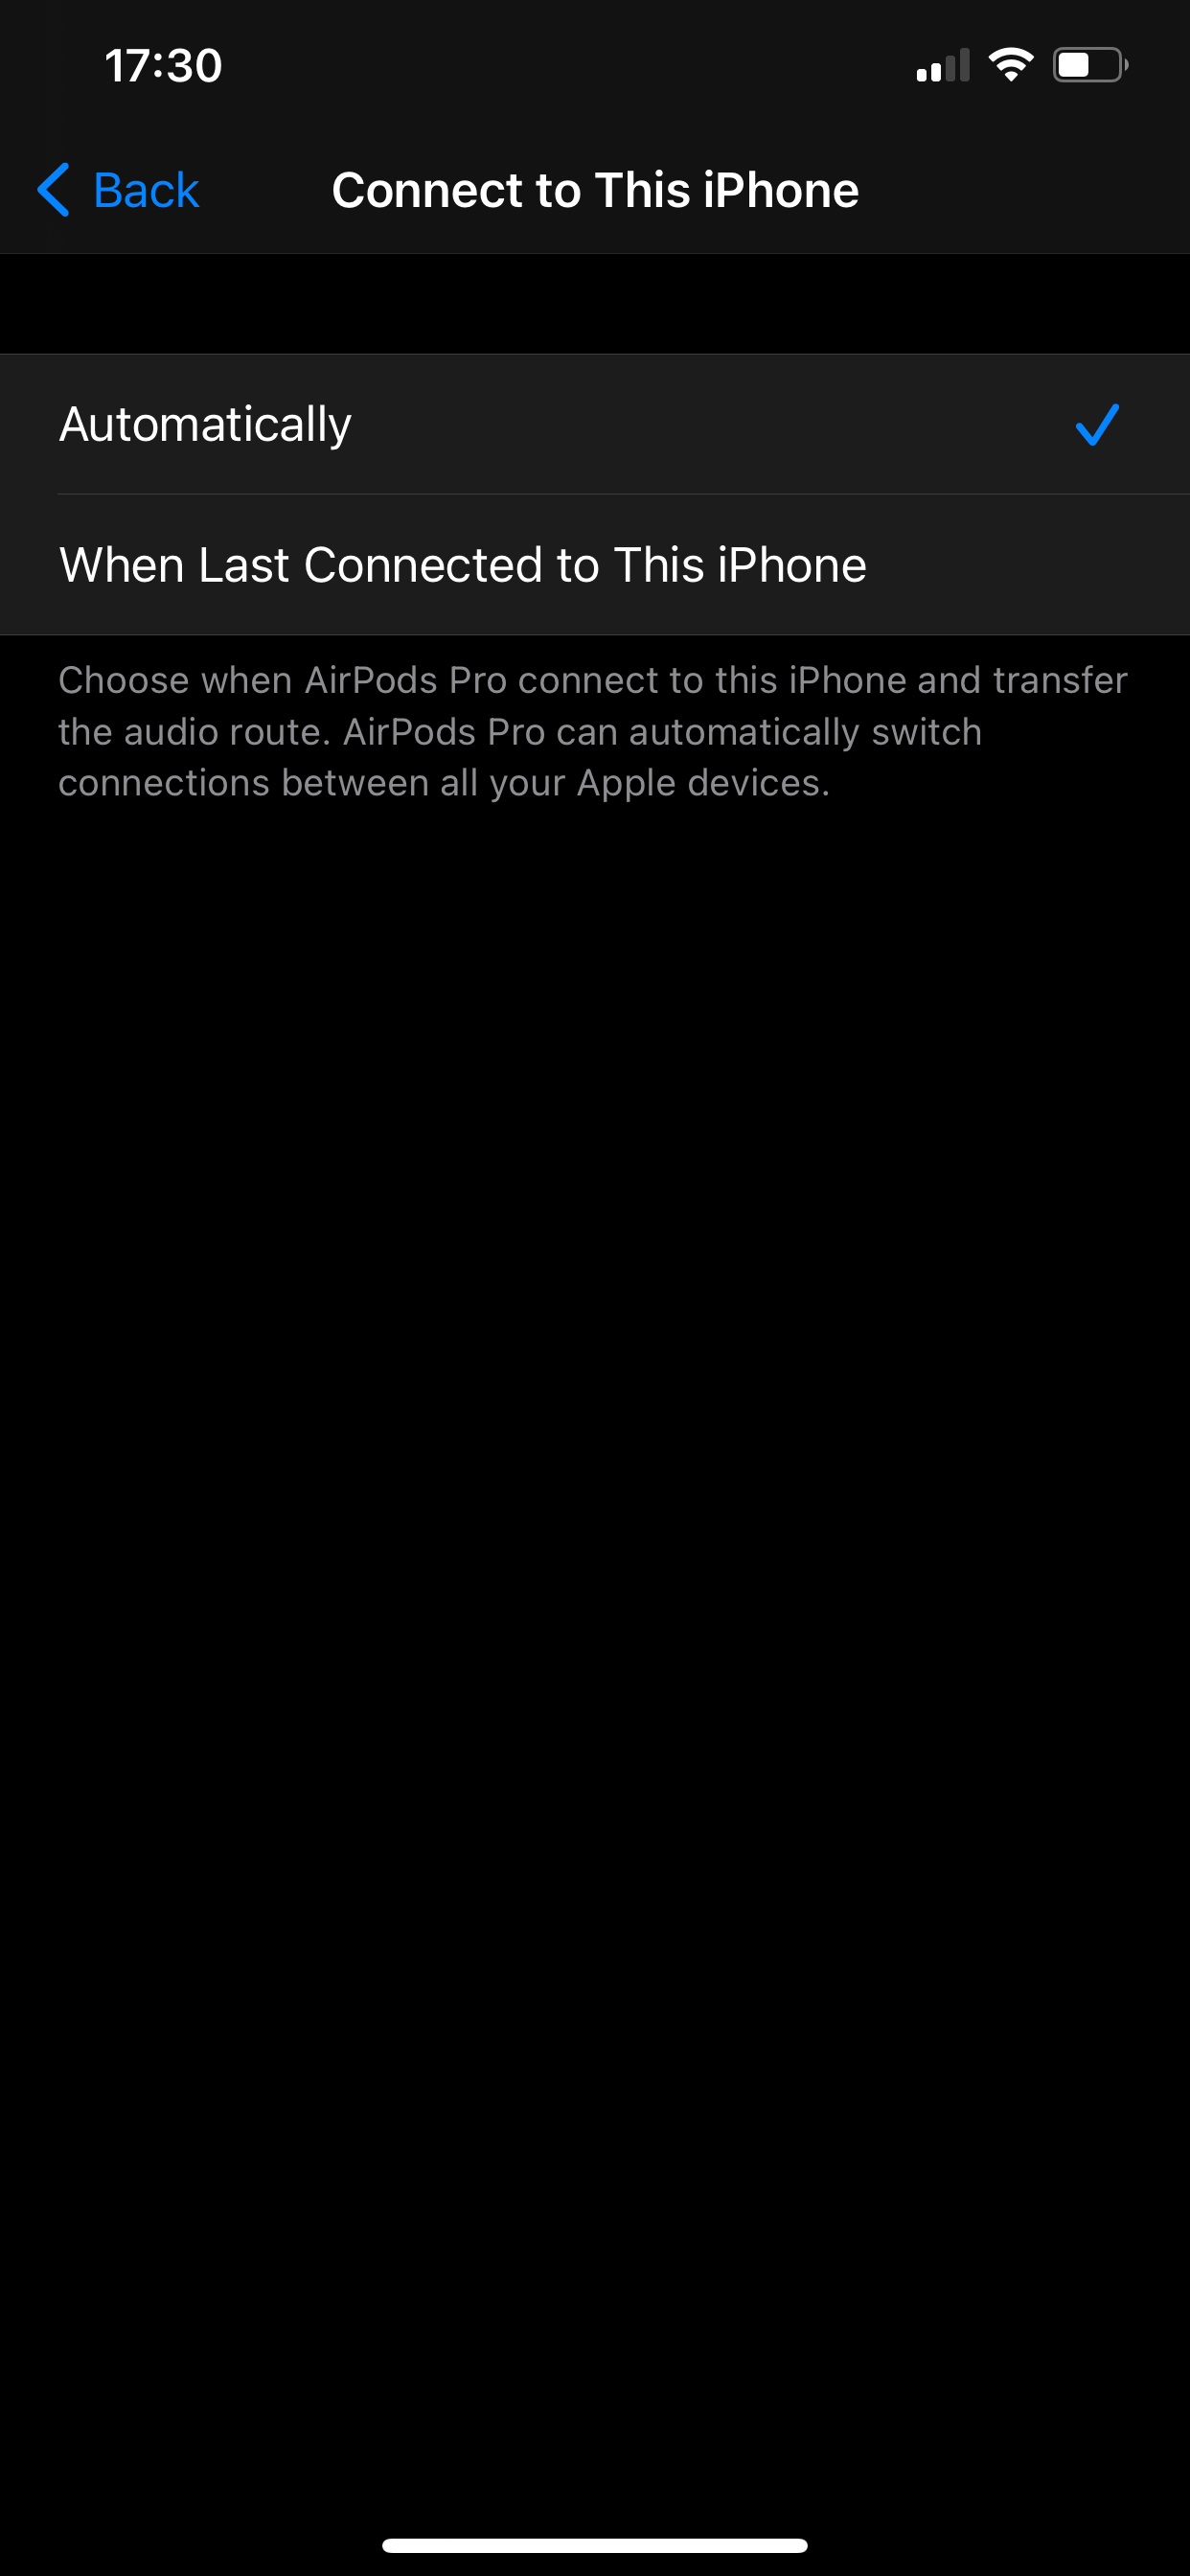 Enable or disable AirPods Pro automatic switching